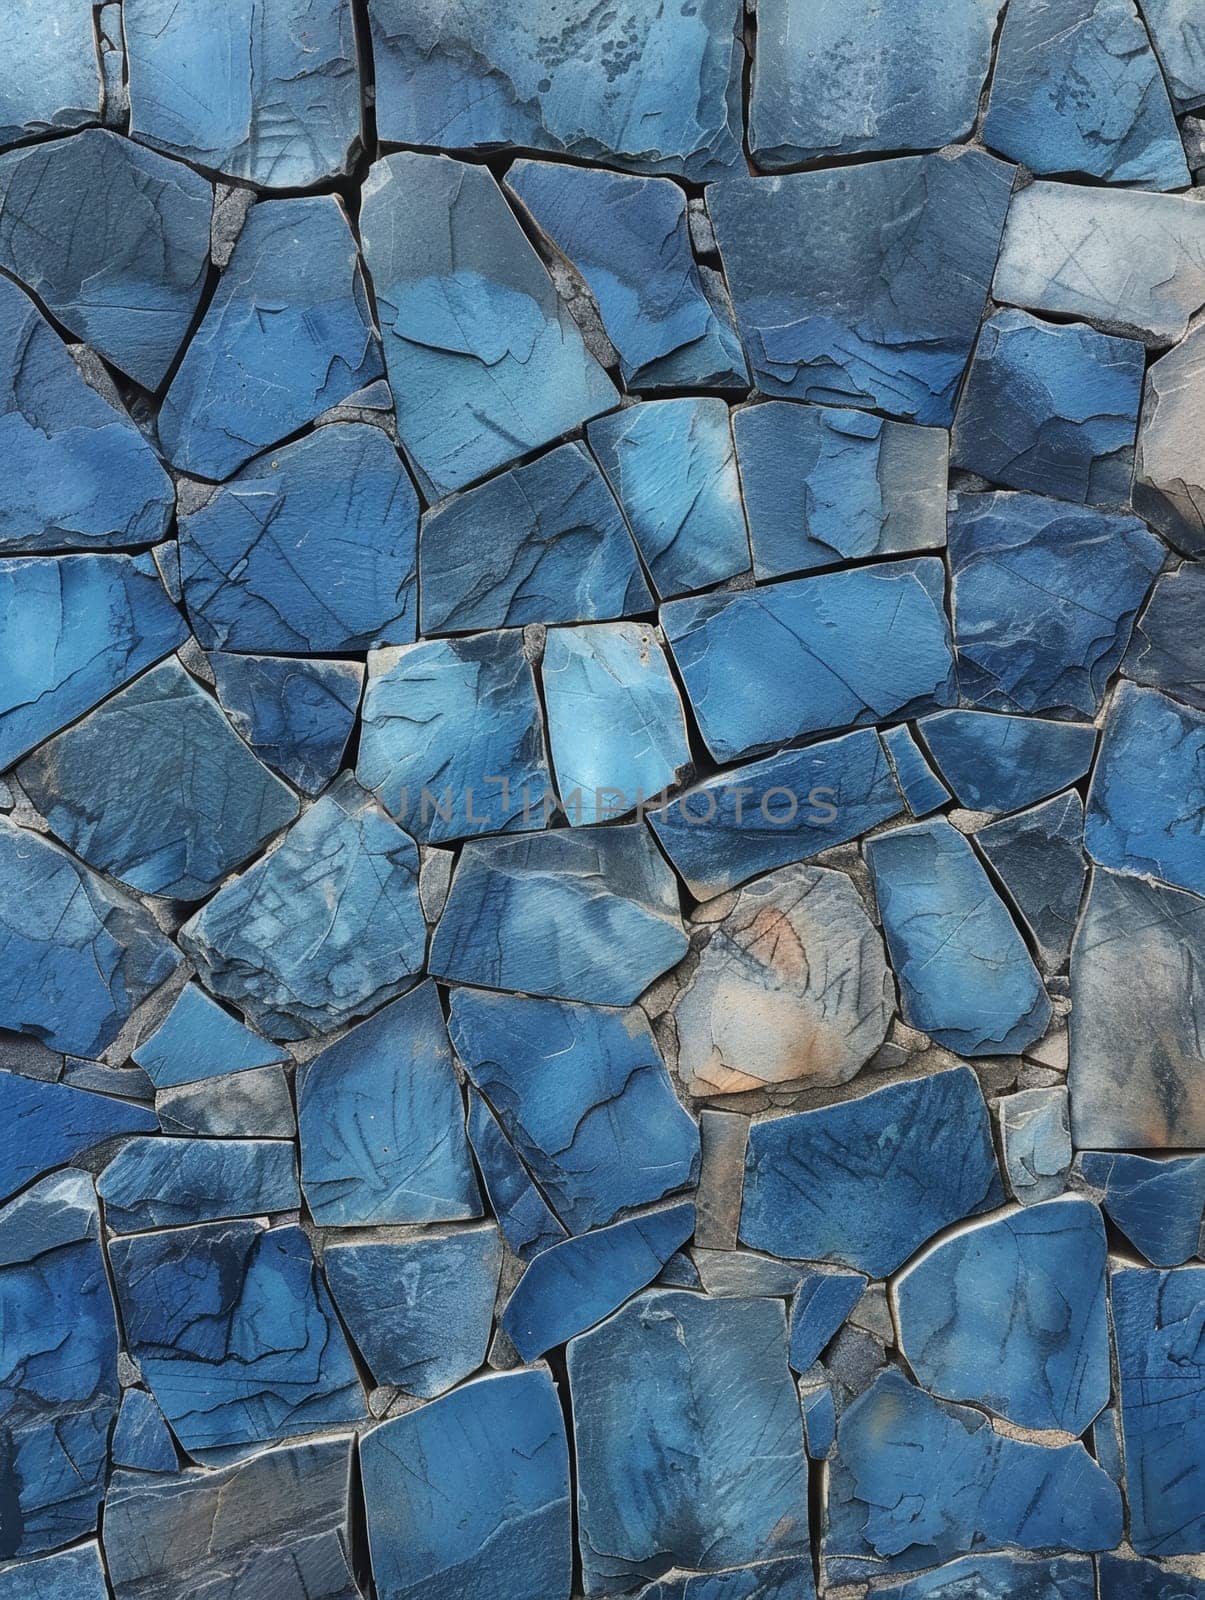 Close-up view of a surface covered with various shapes and sizes of stones embedded in it